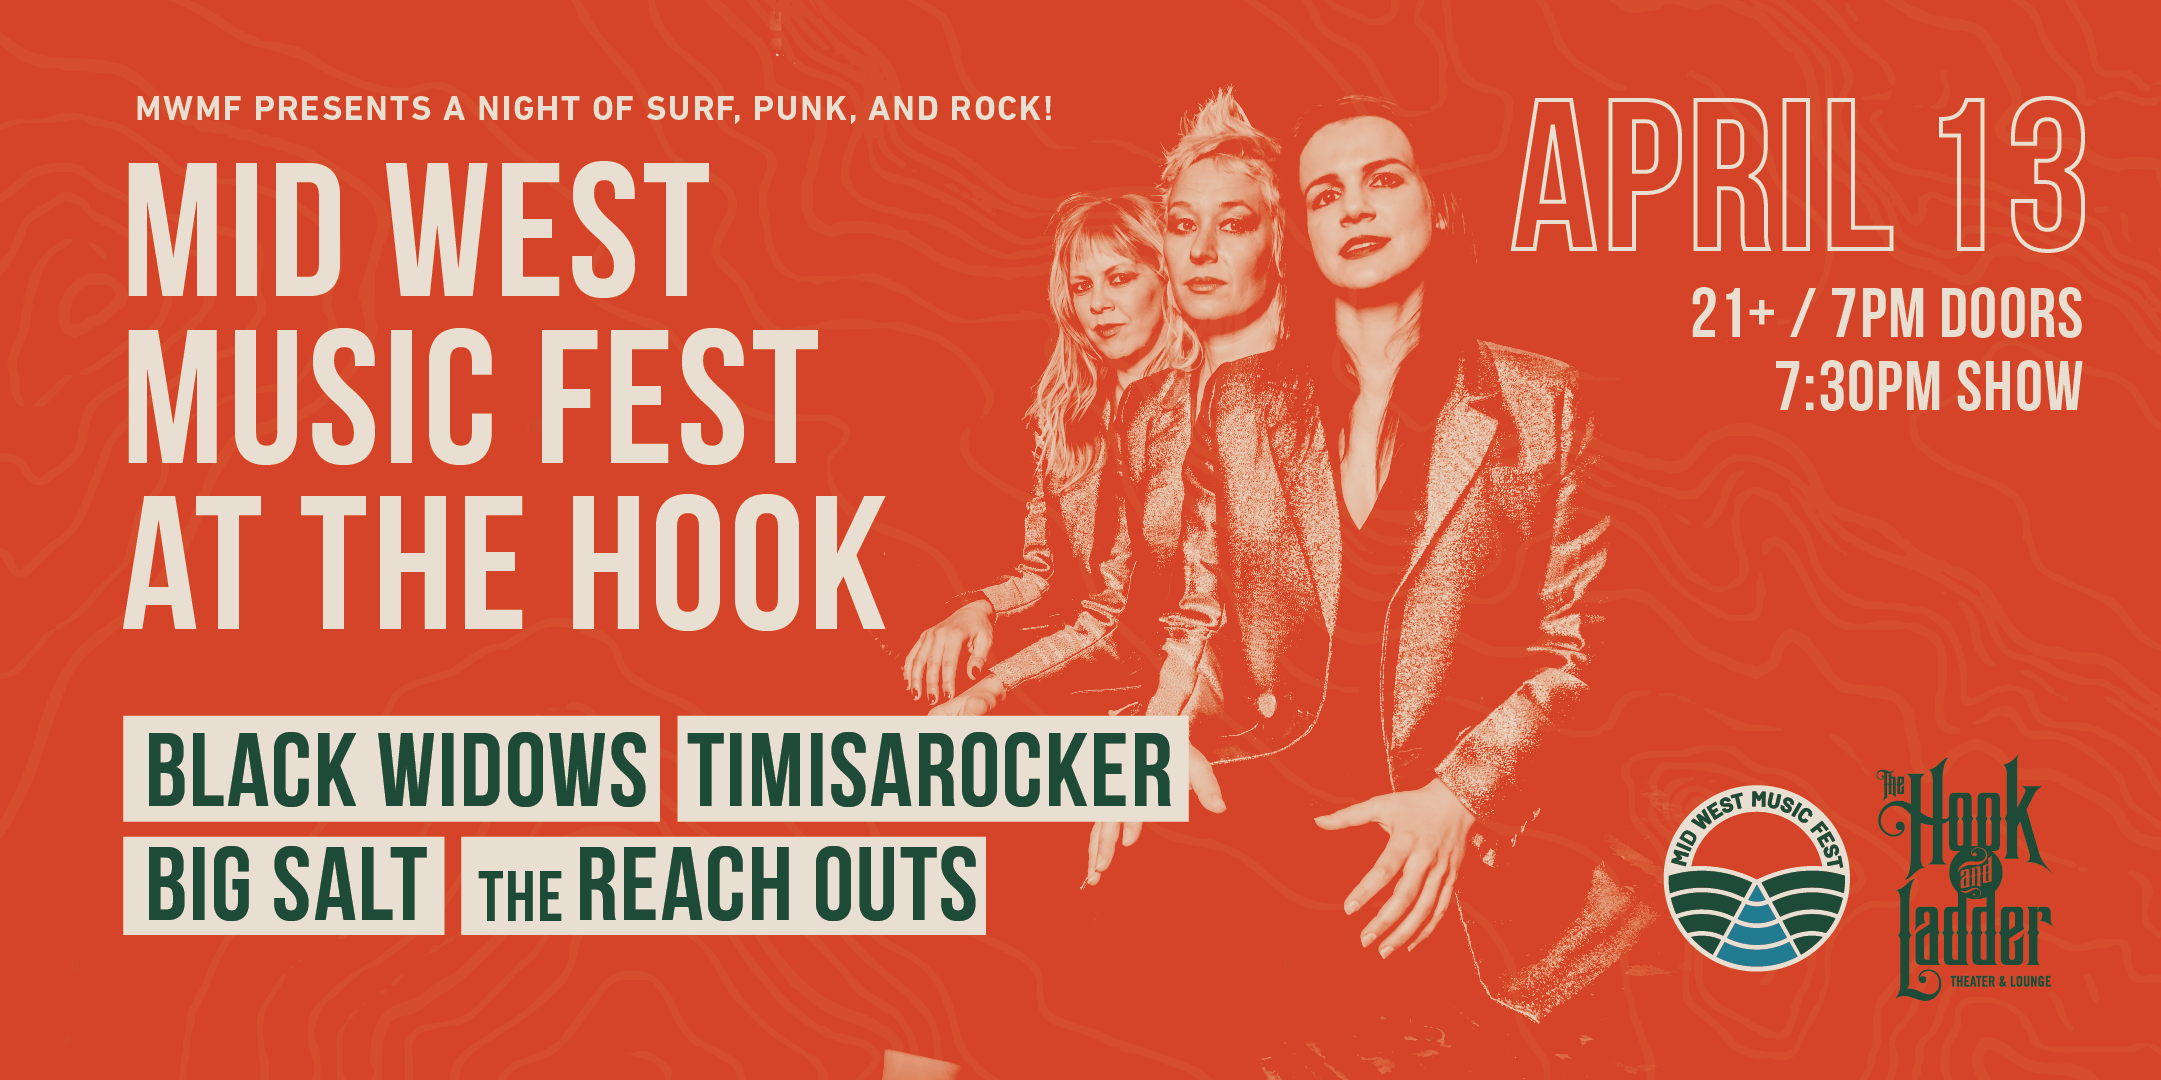 MWMF Presents: Mid West Music Fest At The Hook! w/ Black Widows, Timisarocker, The Reach Outs, & Big Salt Thursday April 13 The Hook and Ladder Theater Doors 7:00pm :: Music 7:30pm :: 21+ General Admission * $10ADV / $15 DOS * Does not include fees NO REFUNDS